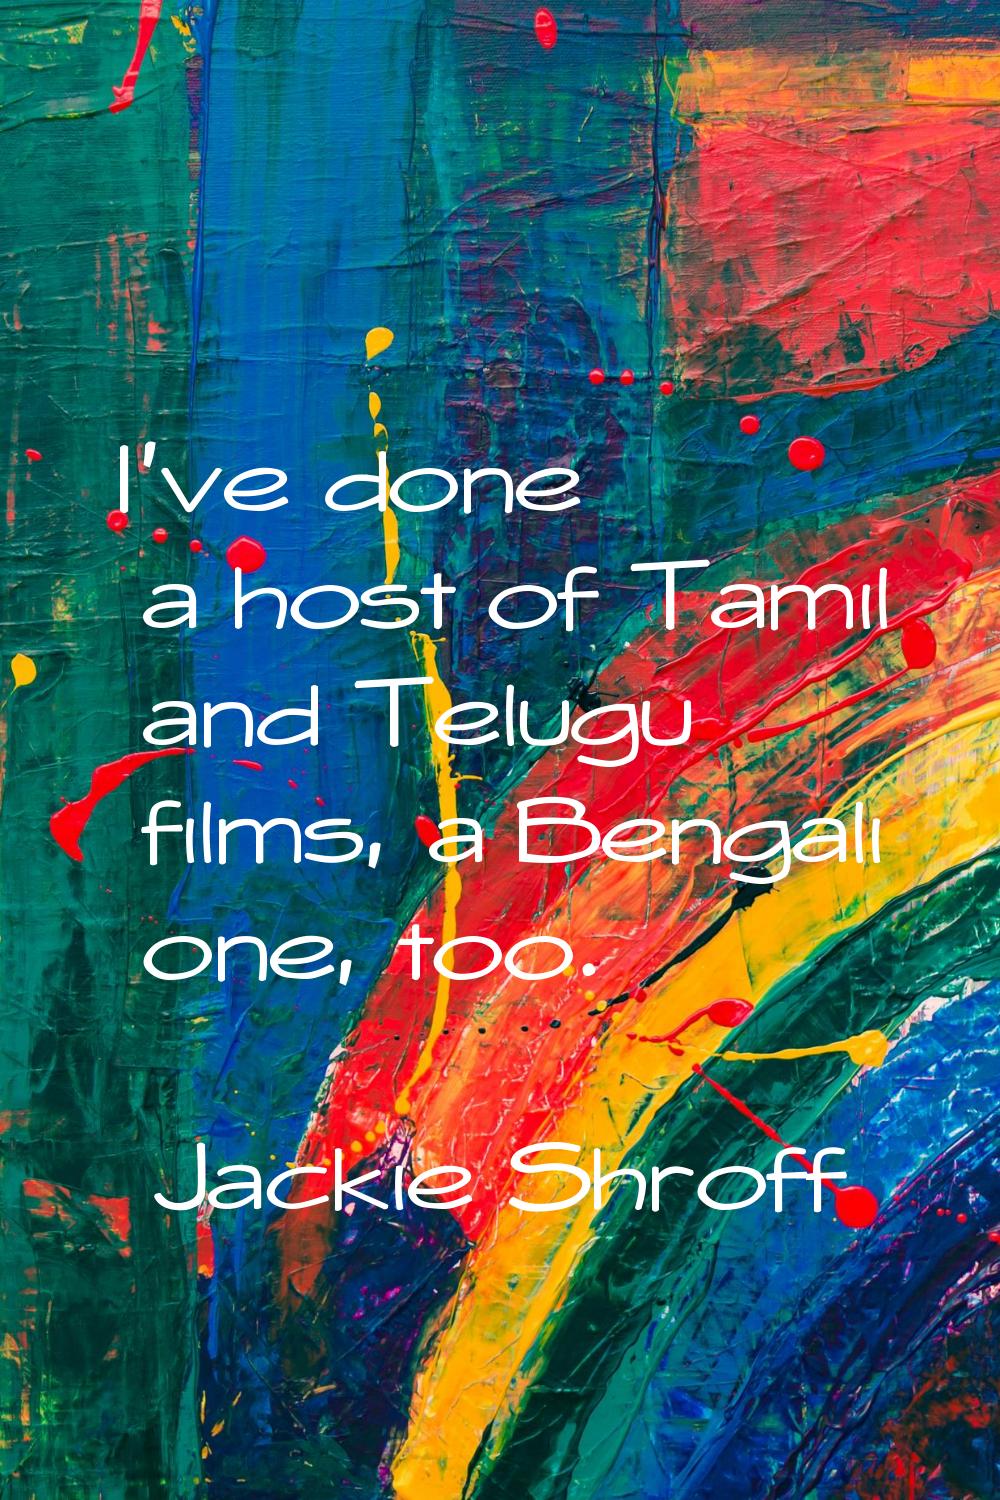 I've done a host of Tamil and Telugu films, a Bengali one, too.